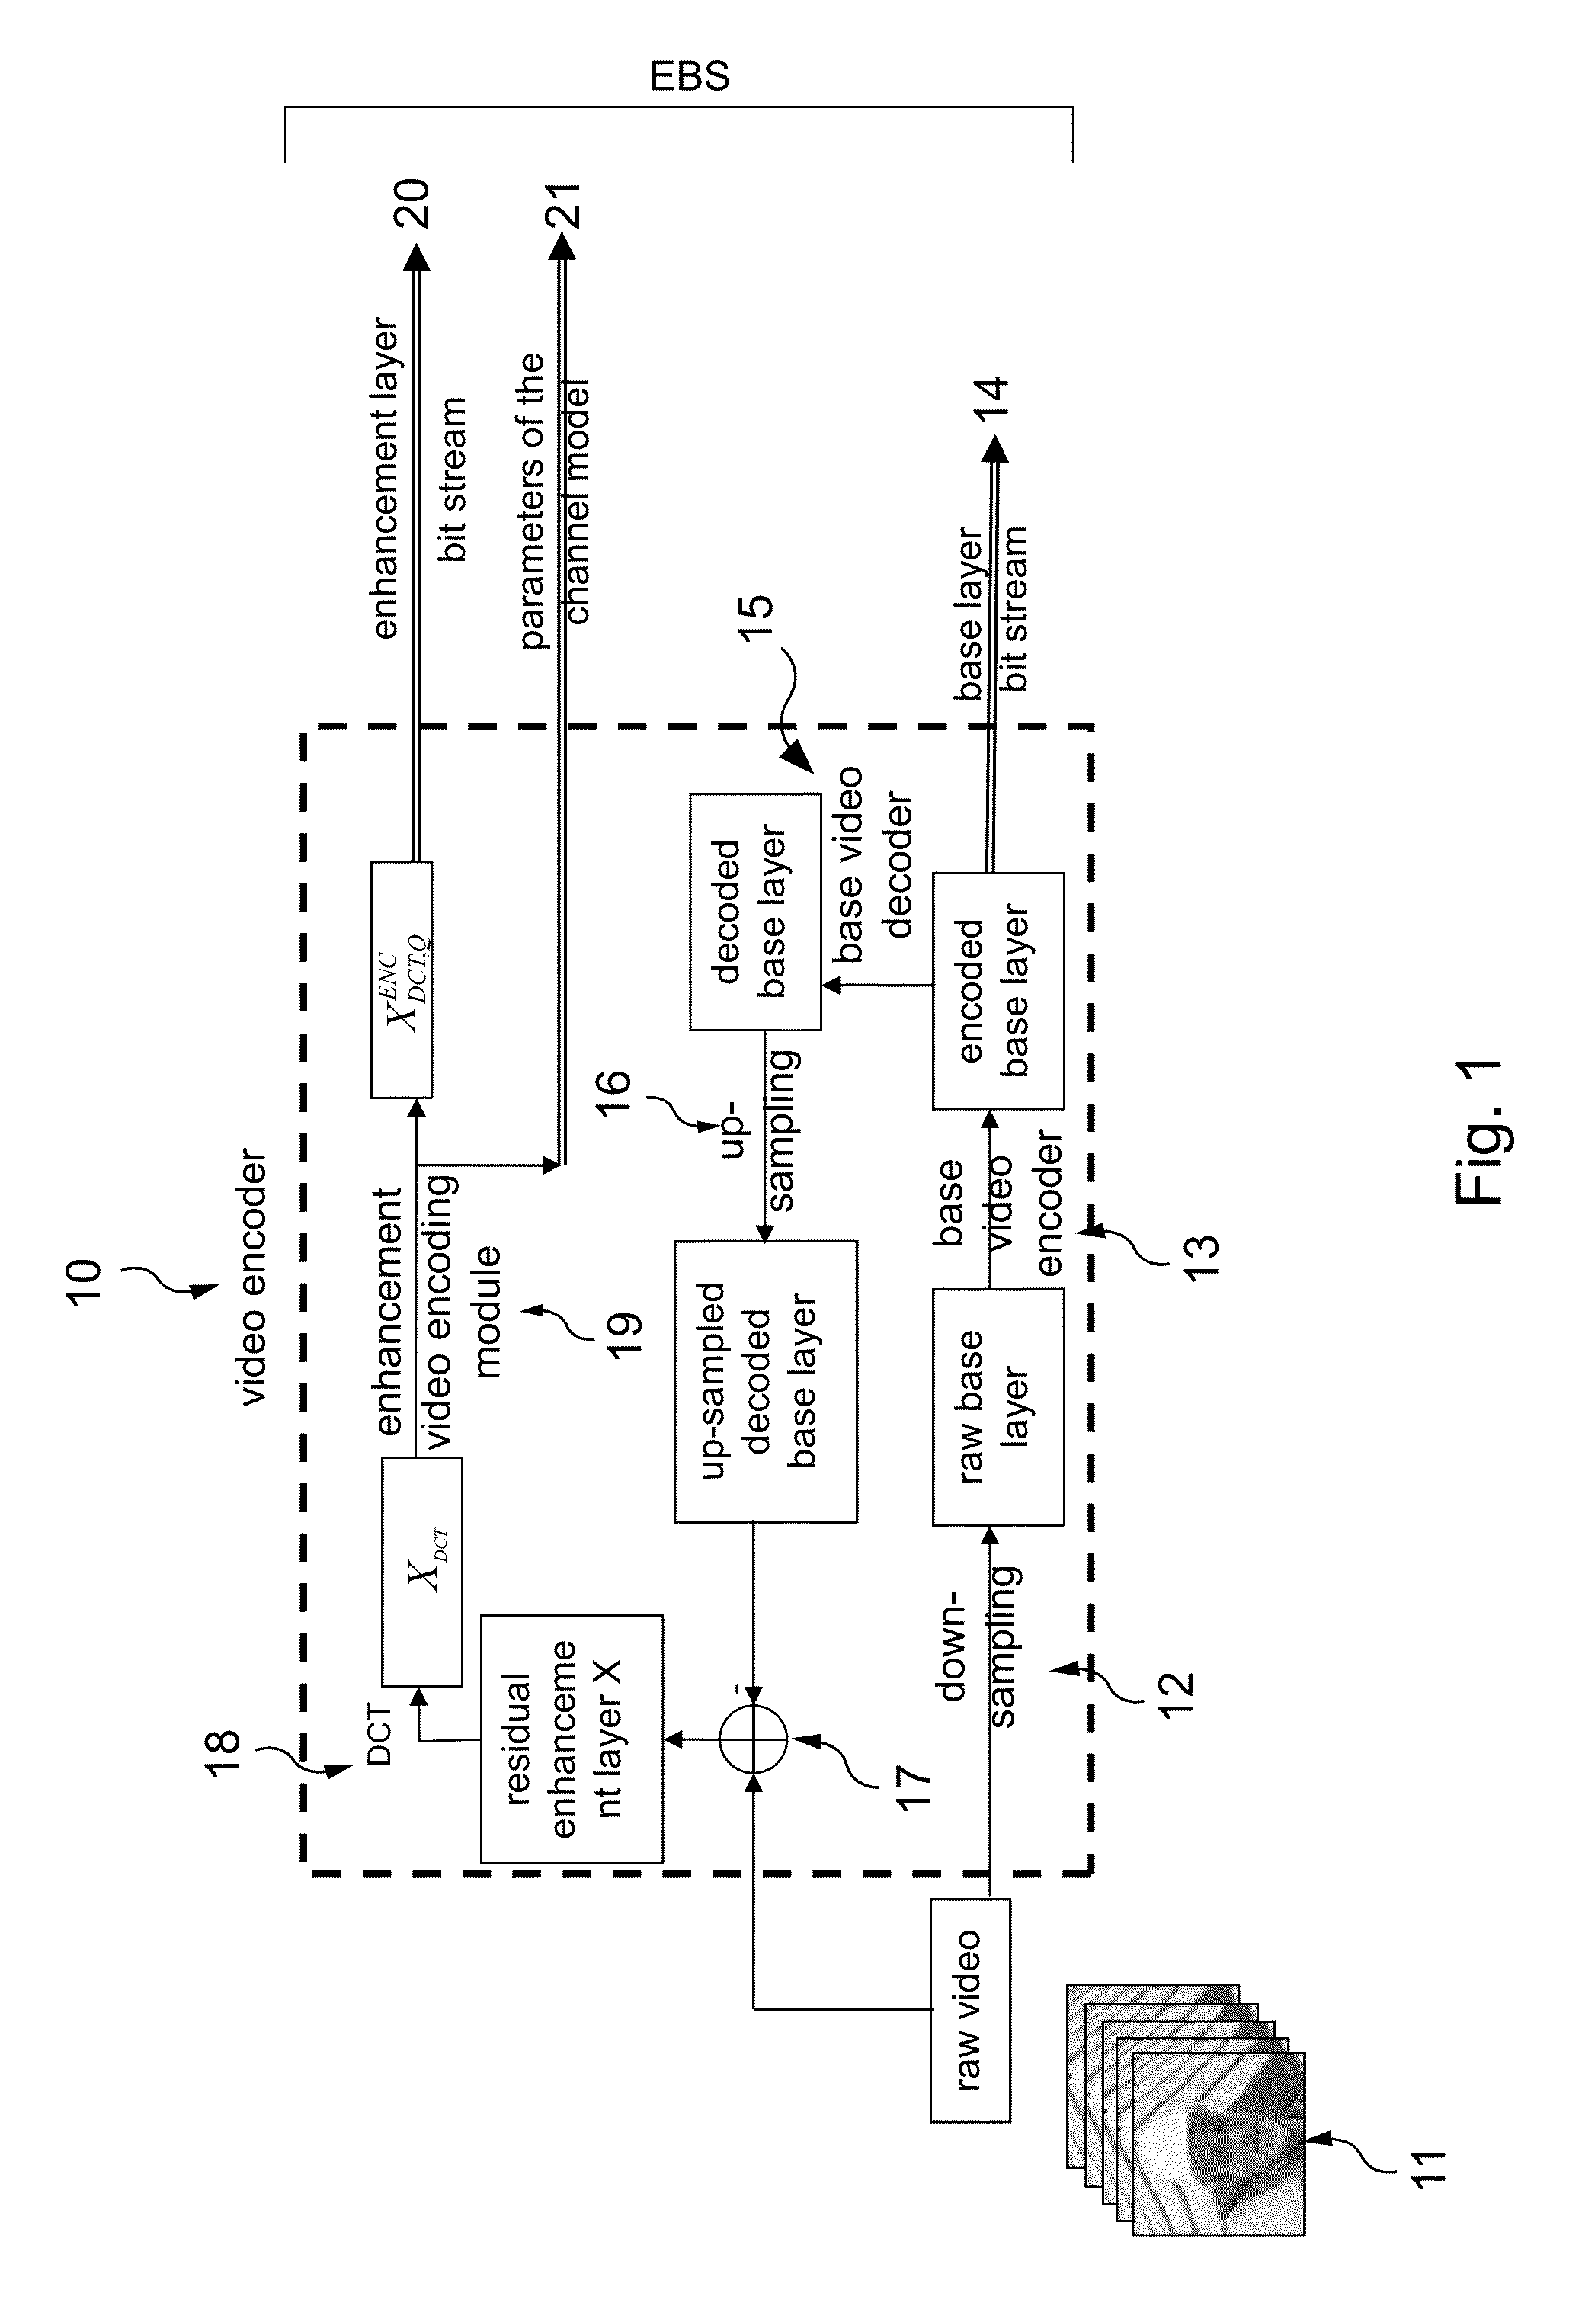 Methods for encoding and decoding an image, and corresponding devices